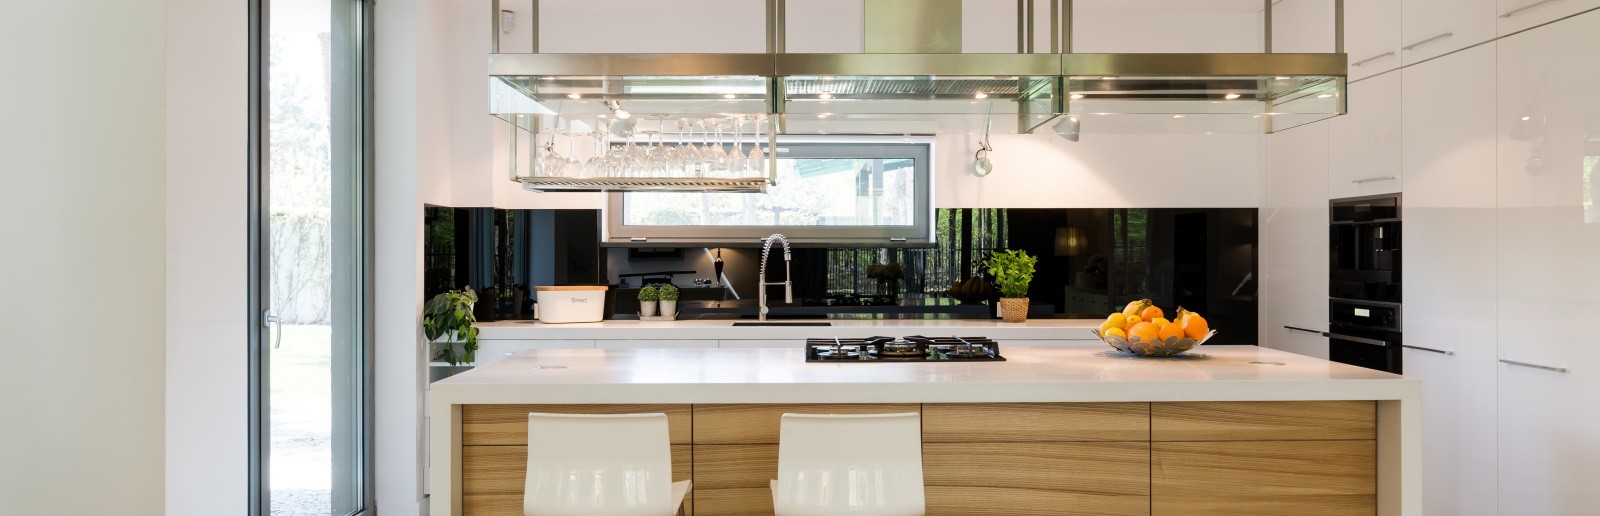 How to Make the Most of Your L-Shaped Kitchen